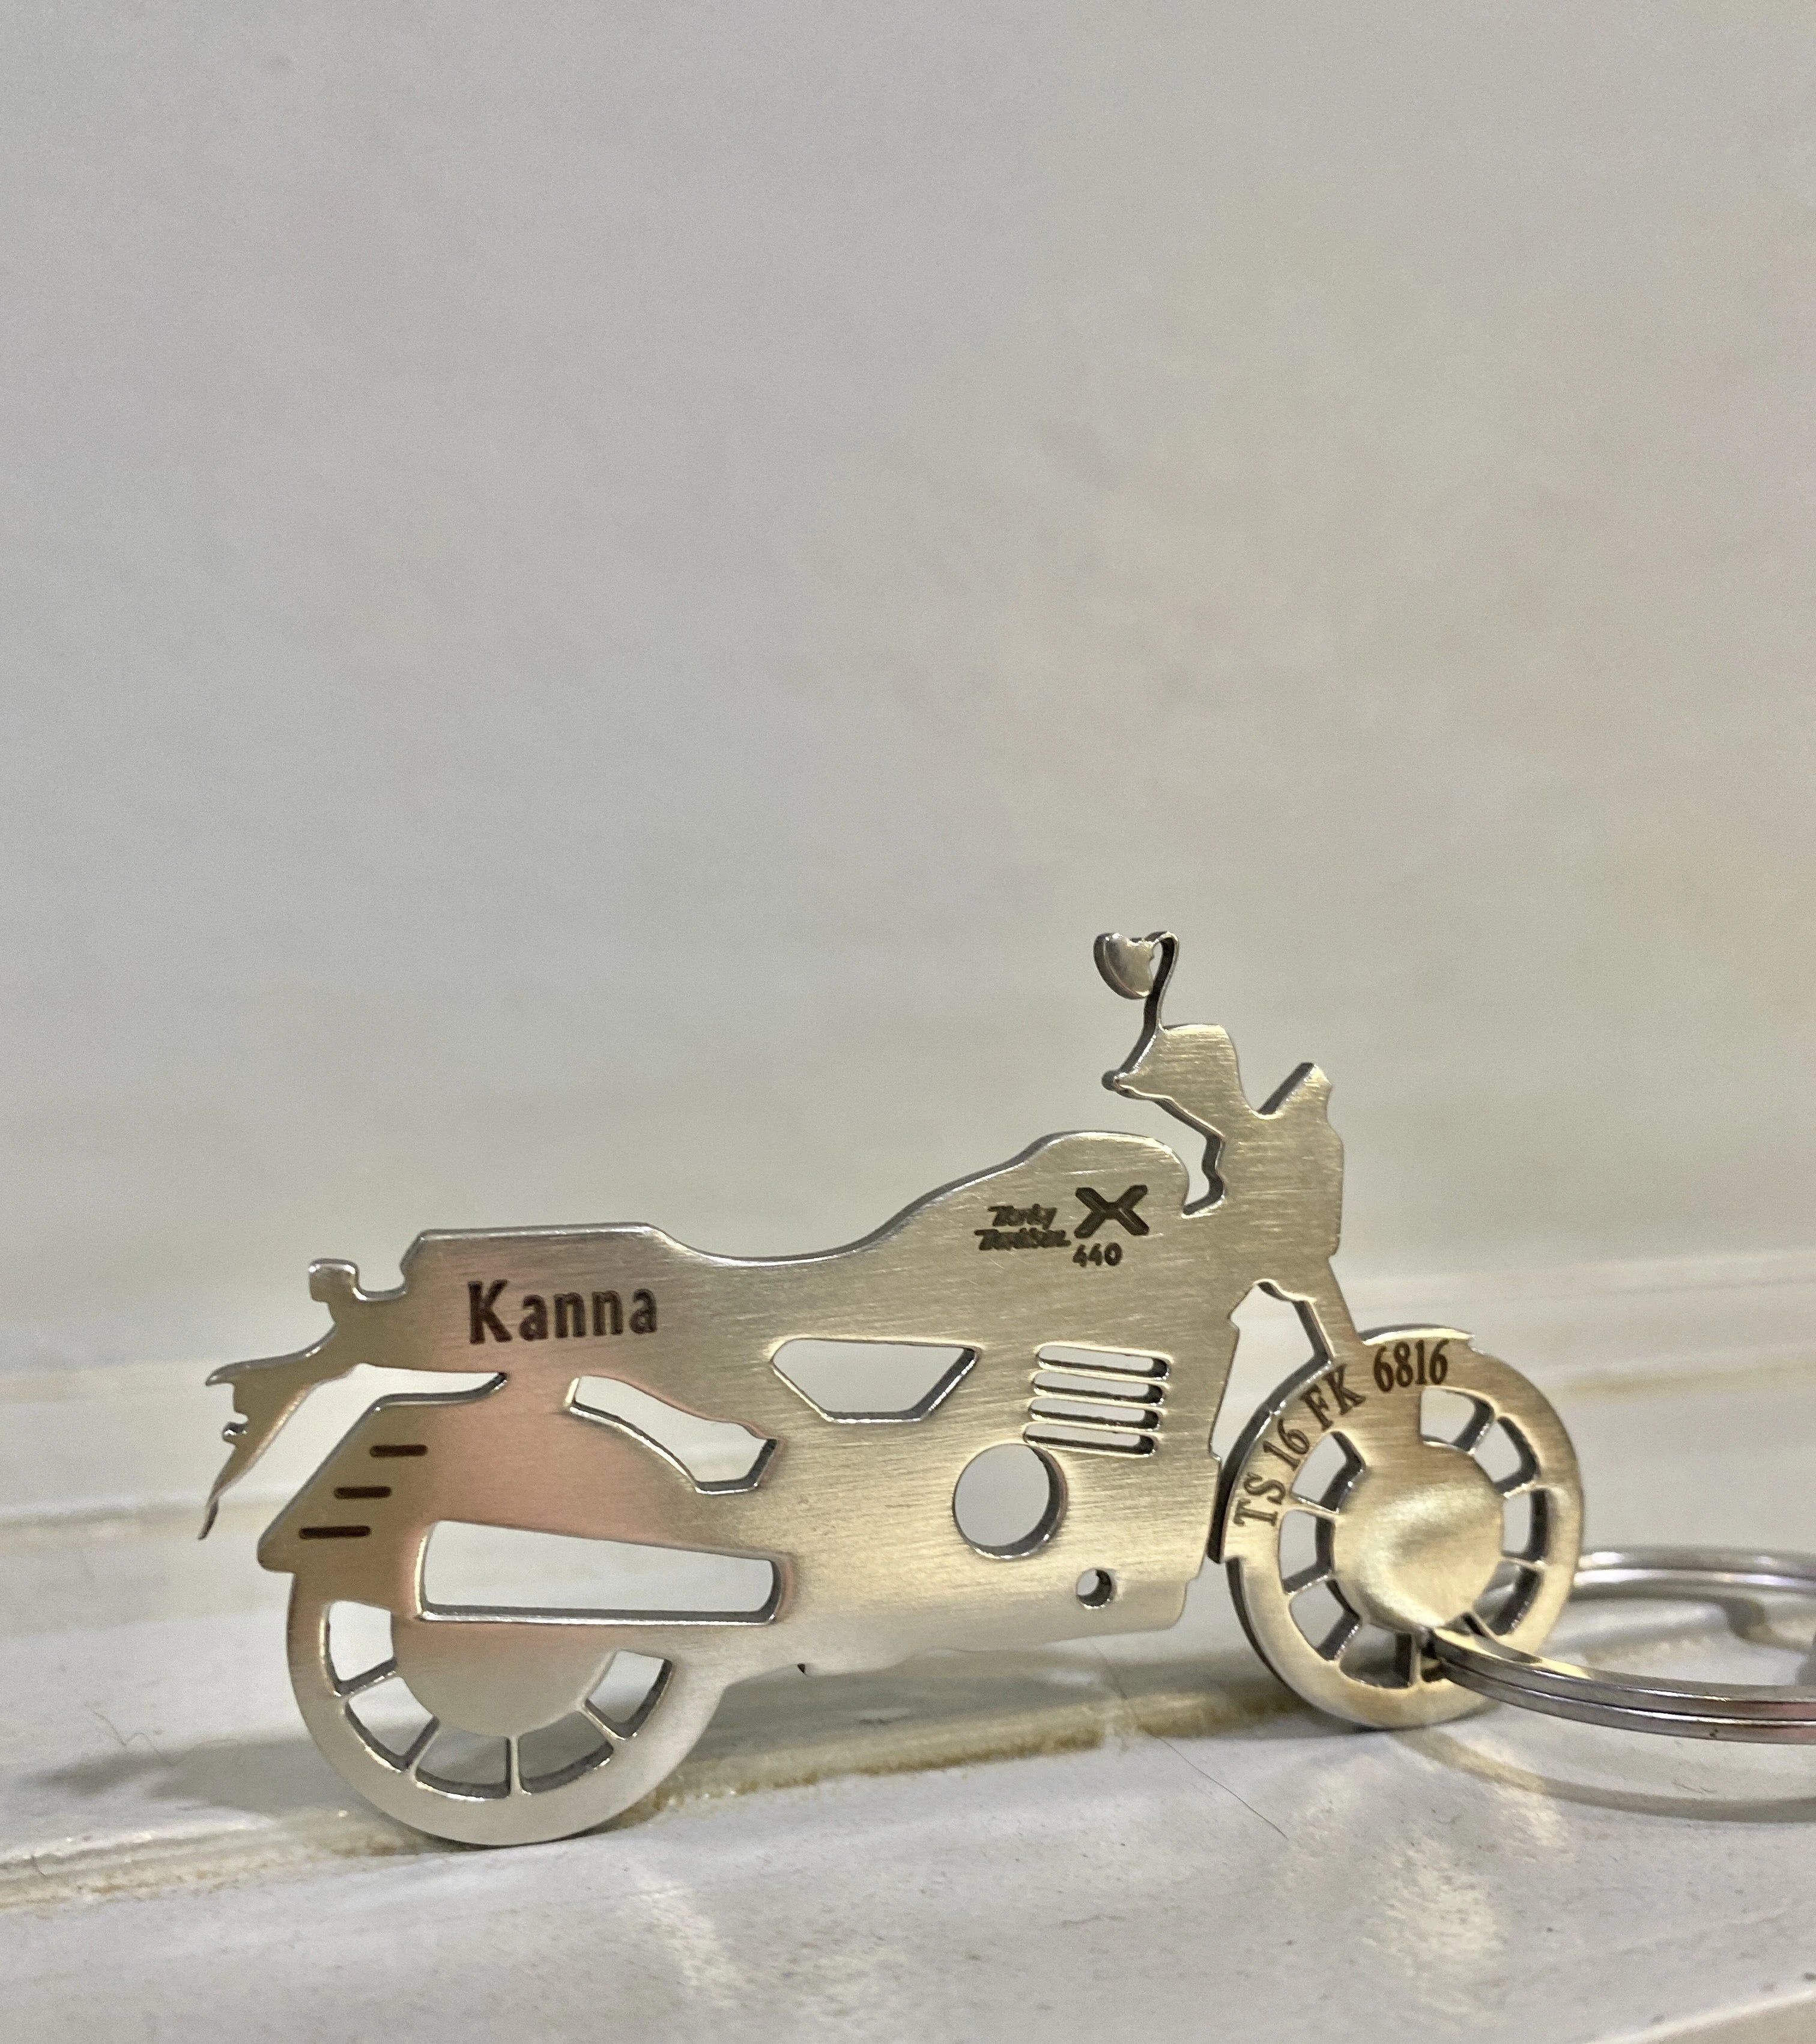 Check out this fantastic personalised bike keychain that's ideal gift for owners of Harley X440s. We have something that would make a fantastic gift for someone who loves his Harley X440